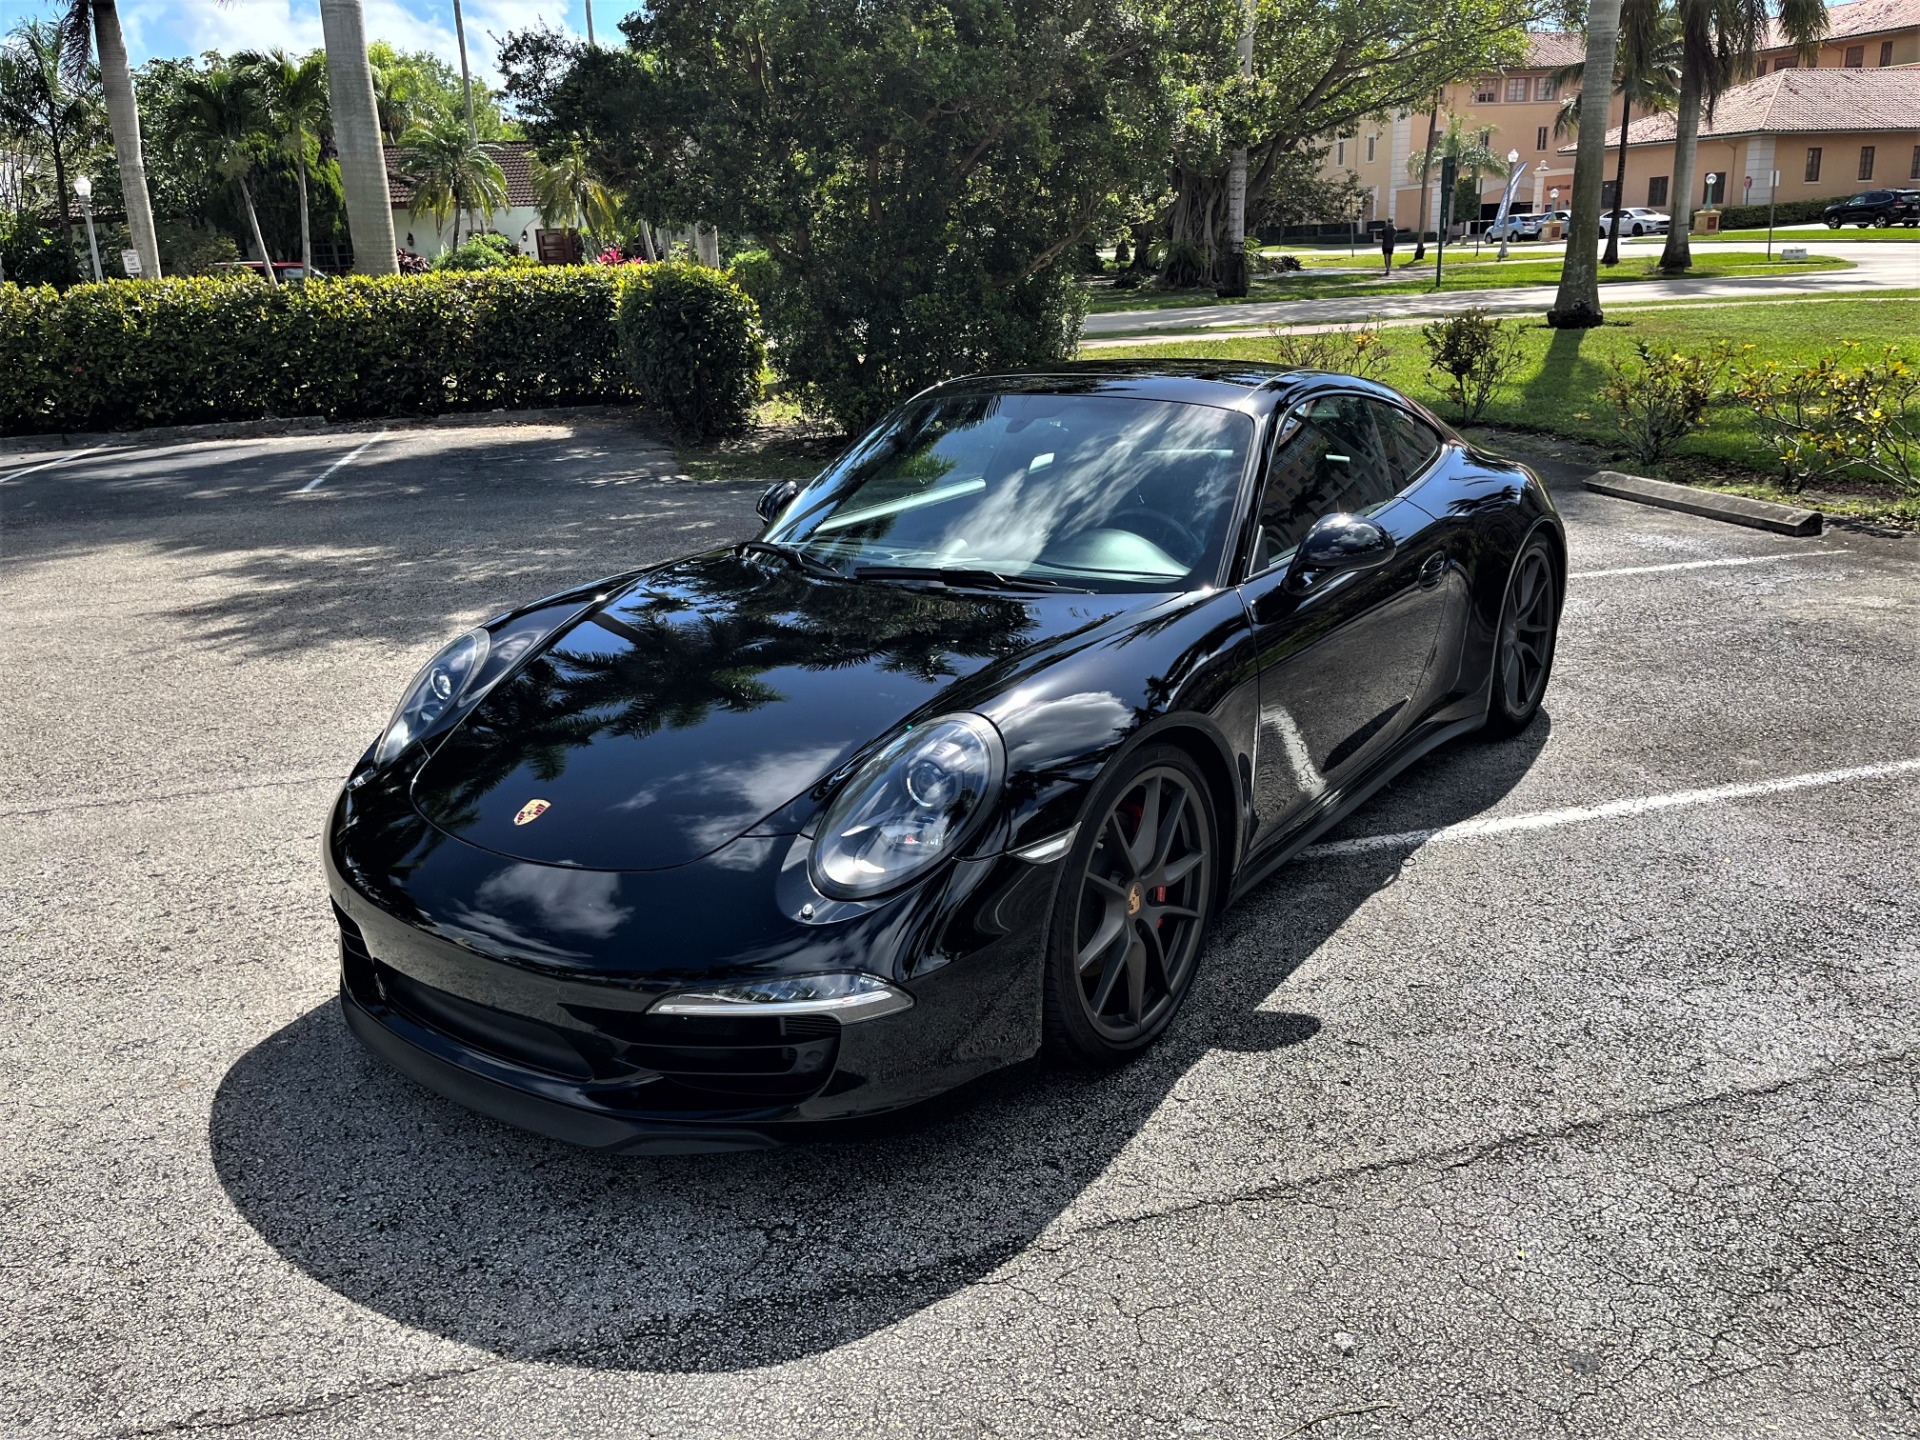 Used 2015 Porsche 911 Carrera 4S for sale Sold at The Gables Sports Cars in Miami FL 33146 4